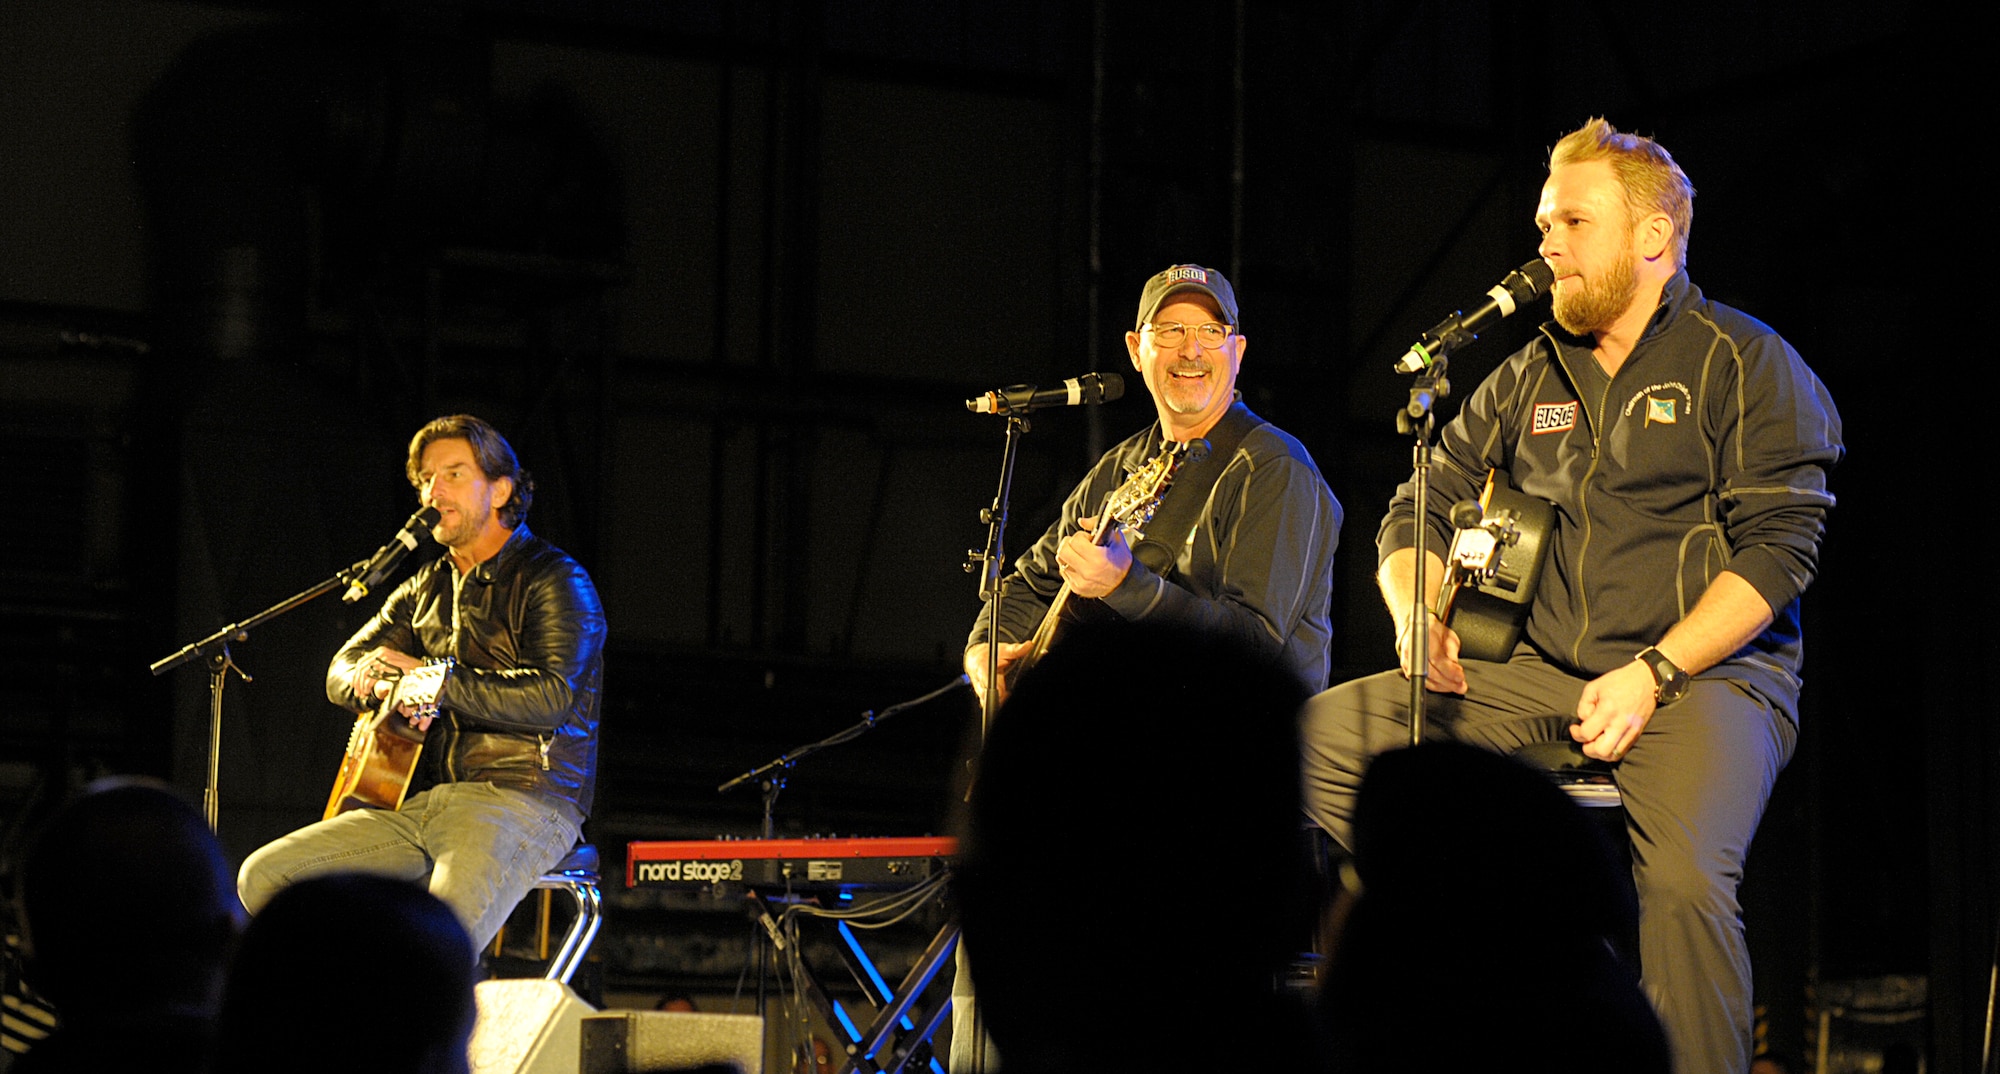 From left, singers and songwriters Brett James, Billy Montana and Kyle Jacobs perform a song during the 2015 USO Holiday Troop Tour Dec. 9, 2015, at Ramstein Air Base, Germany. The performers joined other celebrities and the chairman of the Joint Chiefs of Staff to visit service members and their families on the overseas tour. (U.S. Air Force photo/Staff Sgt. Timothy Moore)